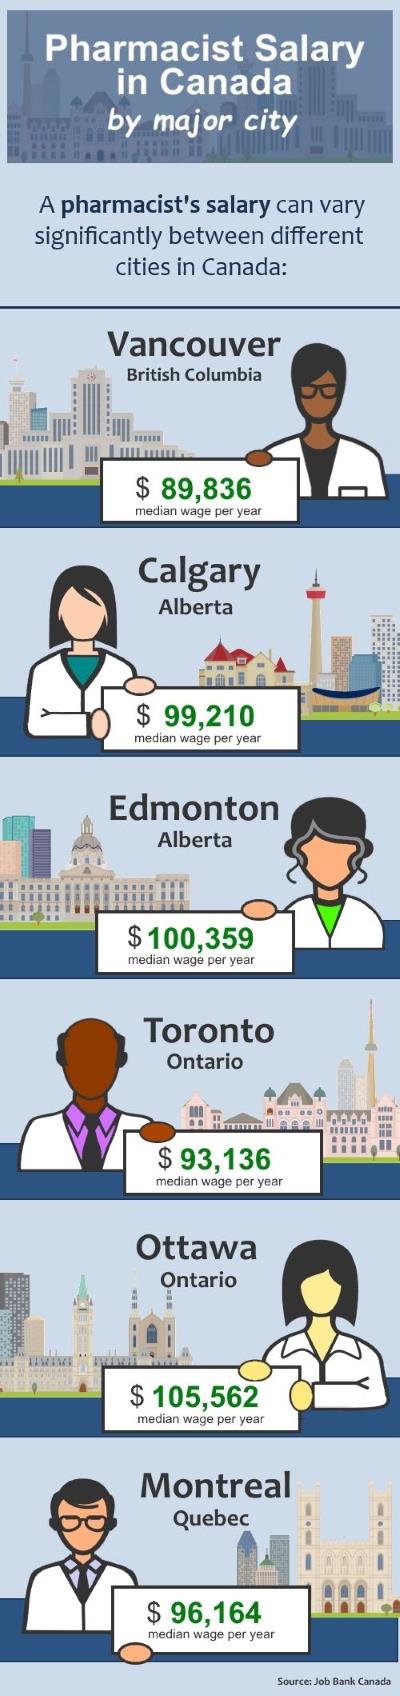 pharmacist-salary-in-canada-by-major-city-infographic-400-x-1696